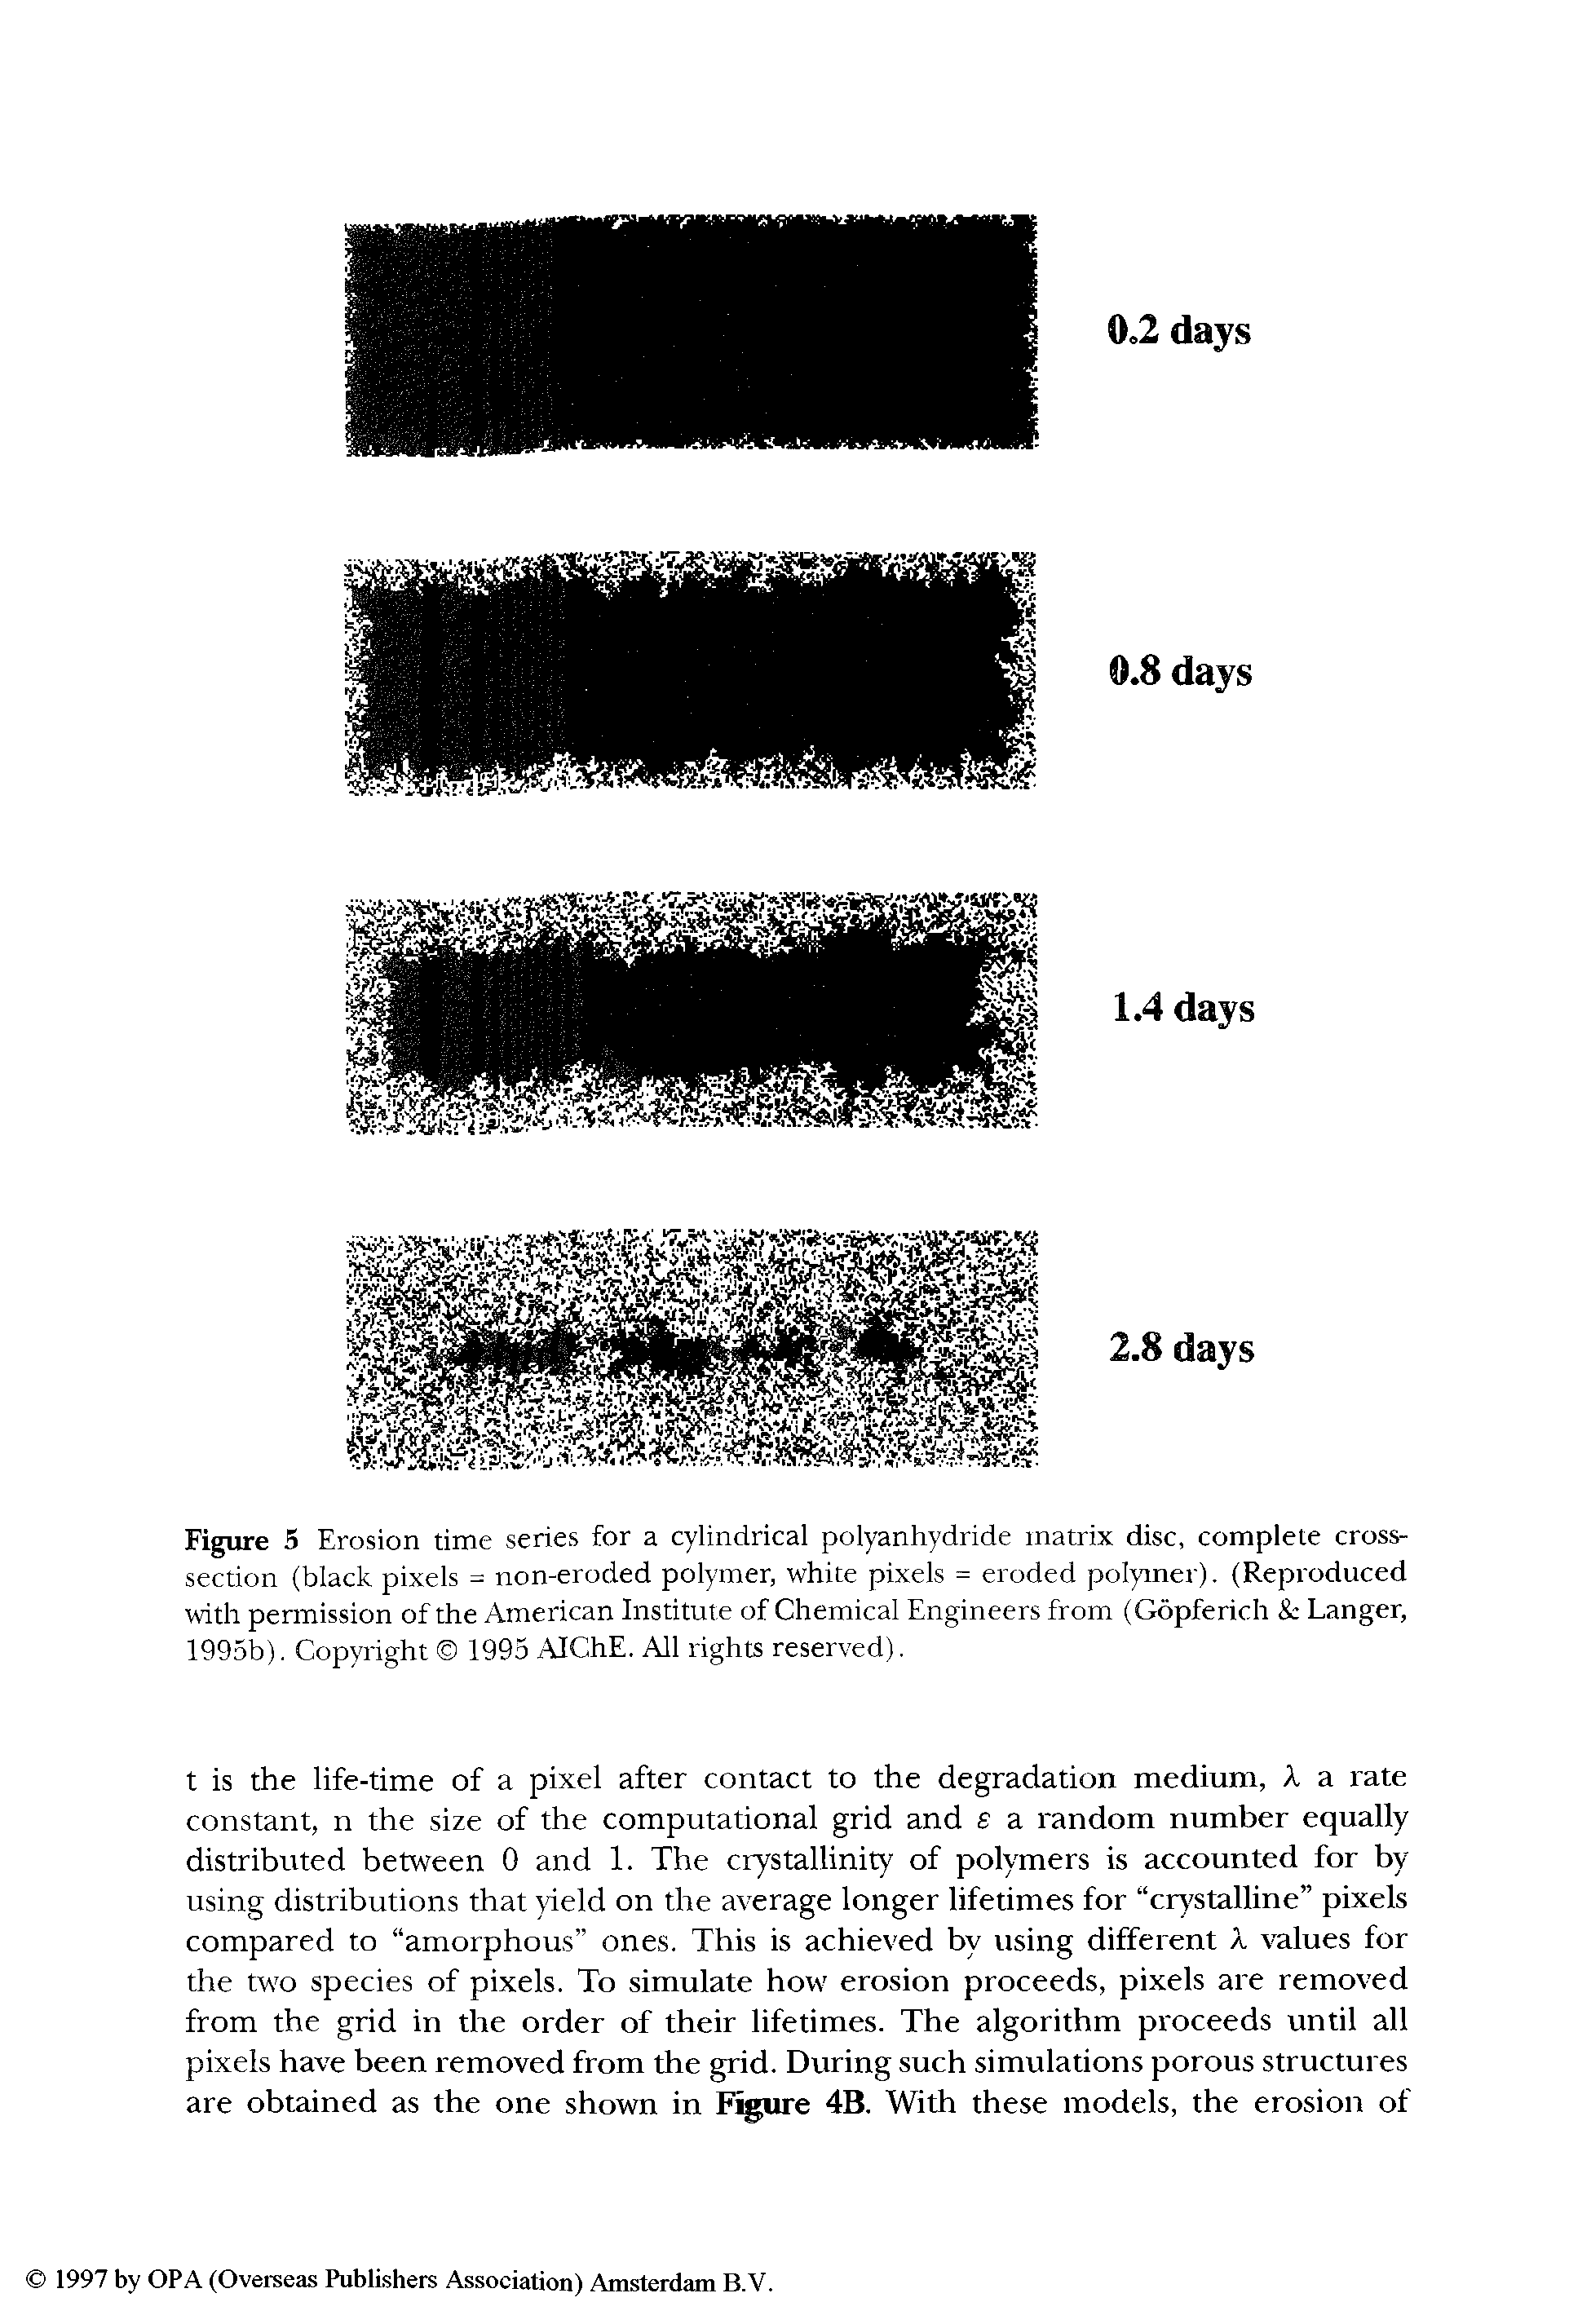 Figure 5 Erosion time series for a cylindrical polyanhydride matrix disc, complete cross-section (black pixels = non-eroded polymer, white pixels = eroded polymer). (Reproduced with permission of the American Institute of Chemical Engineers from (Gopferich Langer, 1995b). Cop)Tight 1995 AIChE. All rights reserved).